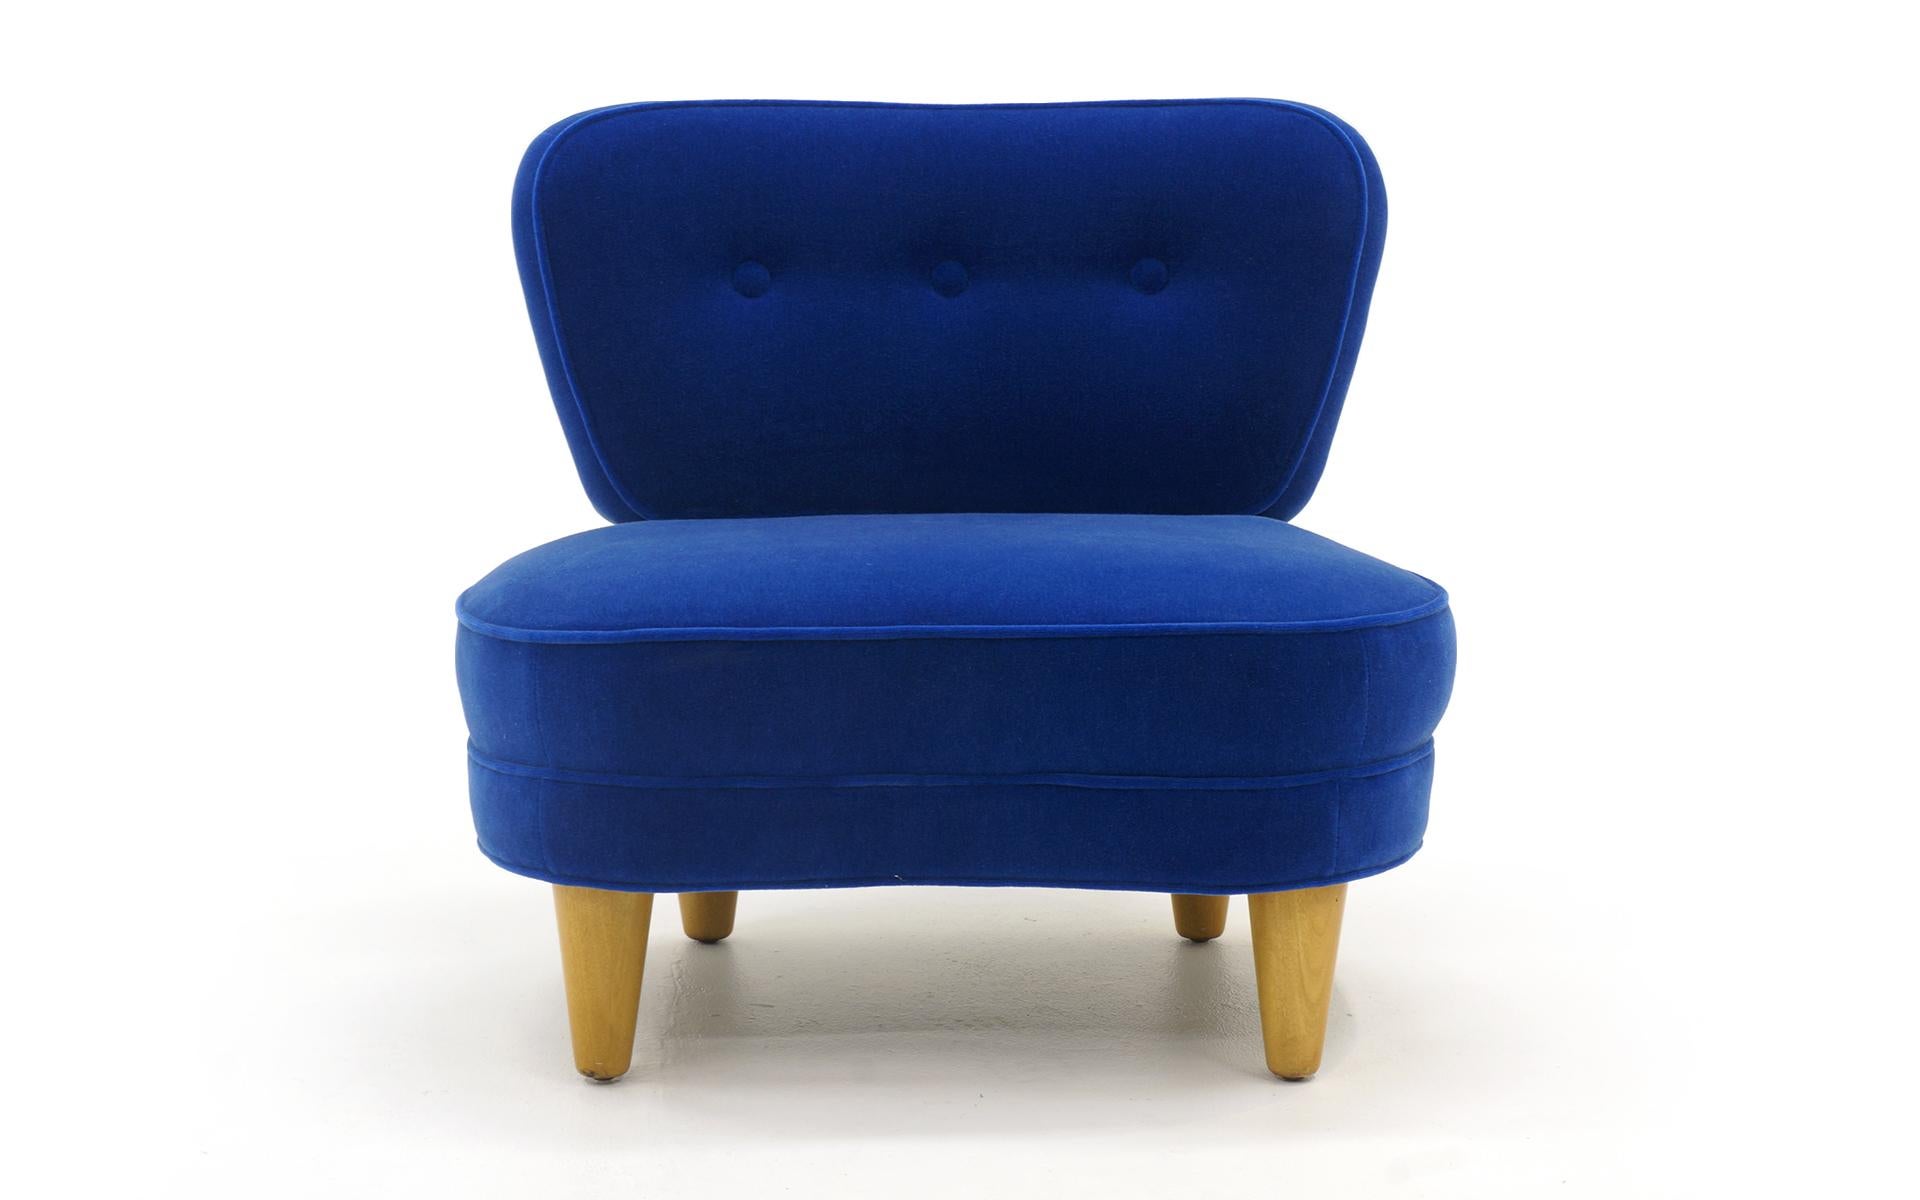 We used a gorgeous real blue mohair to reupholster this early lounge chair designed by Edward Wormley for Dunbar. It is stunning.